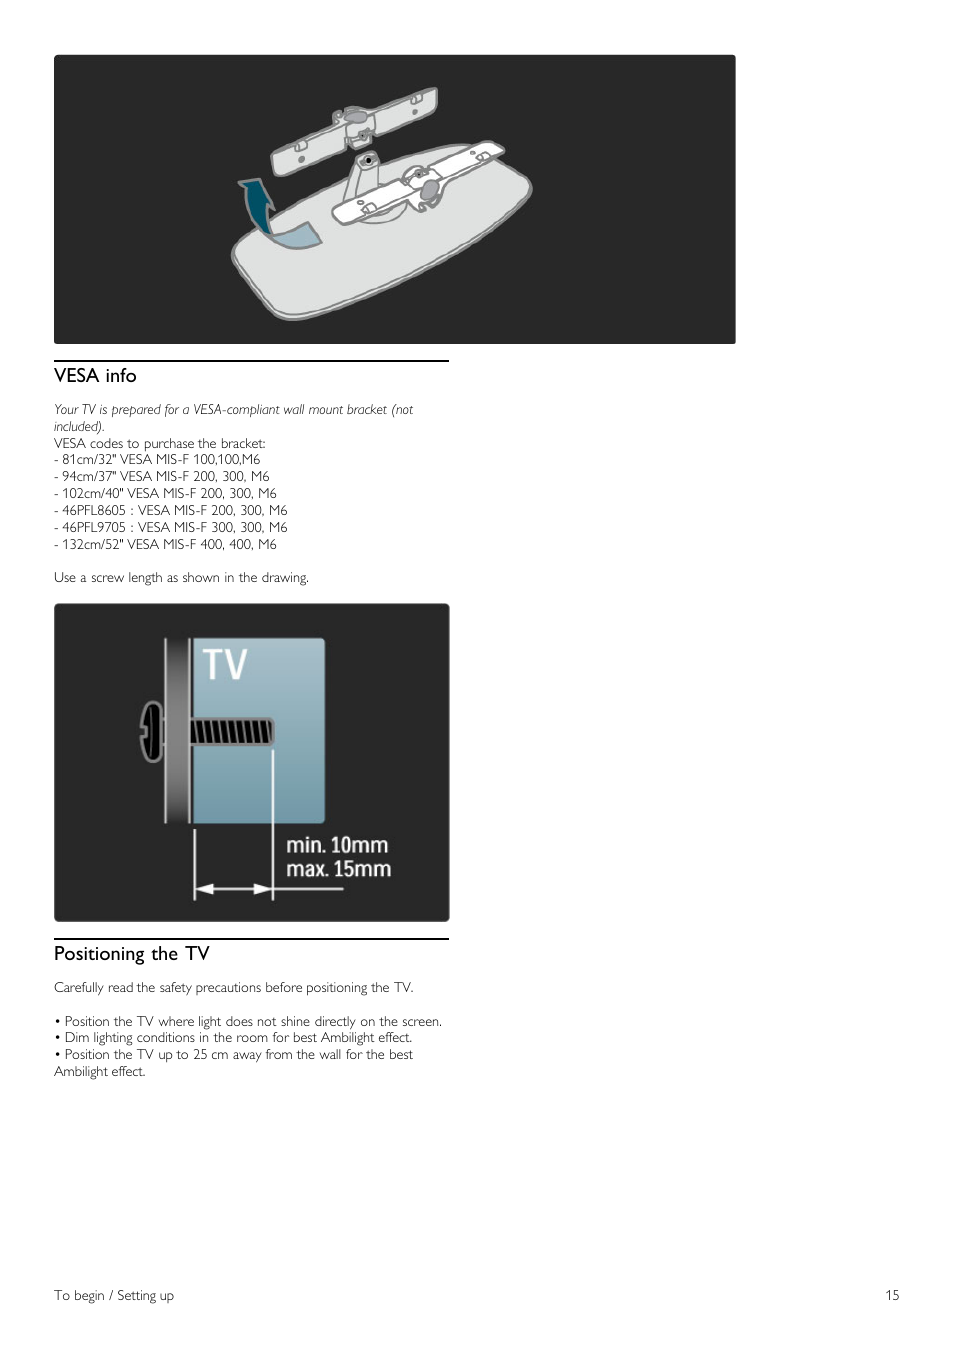 Vesa info, Positioning the tv | Philips 40PFL8605H-12 User Manual | Page 15  / 91